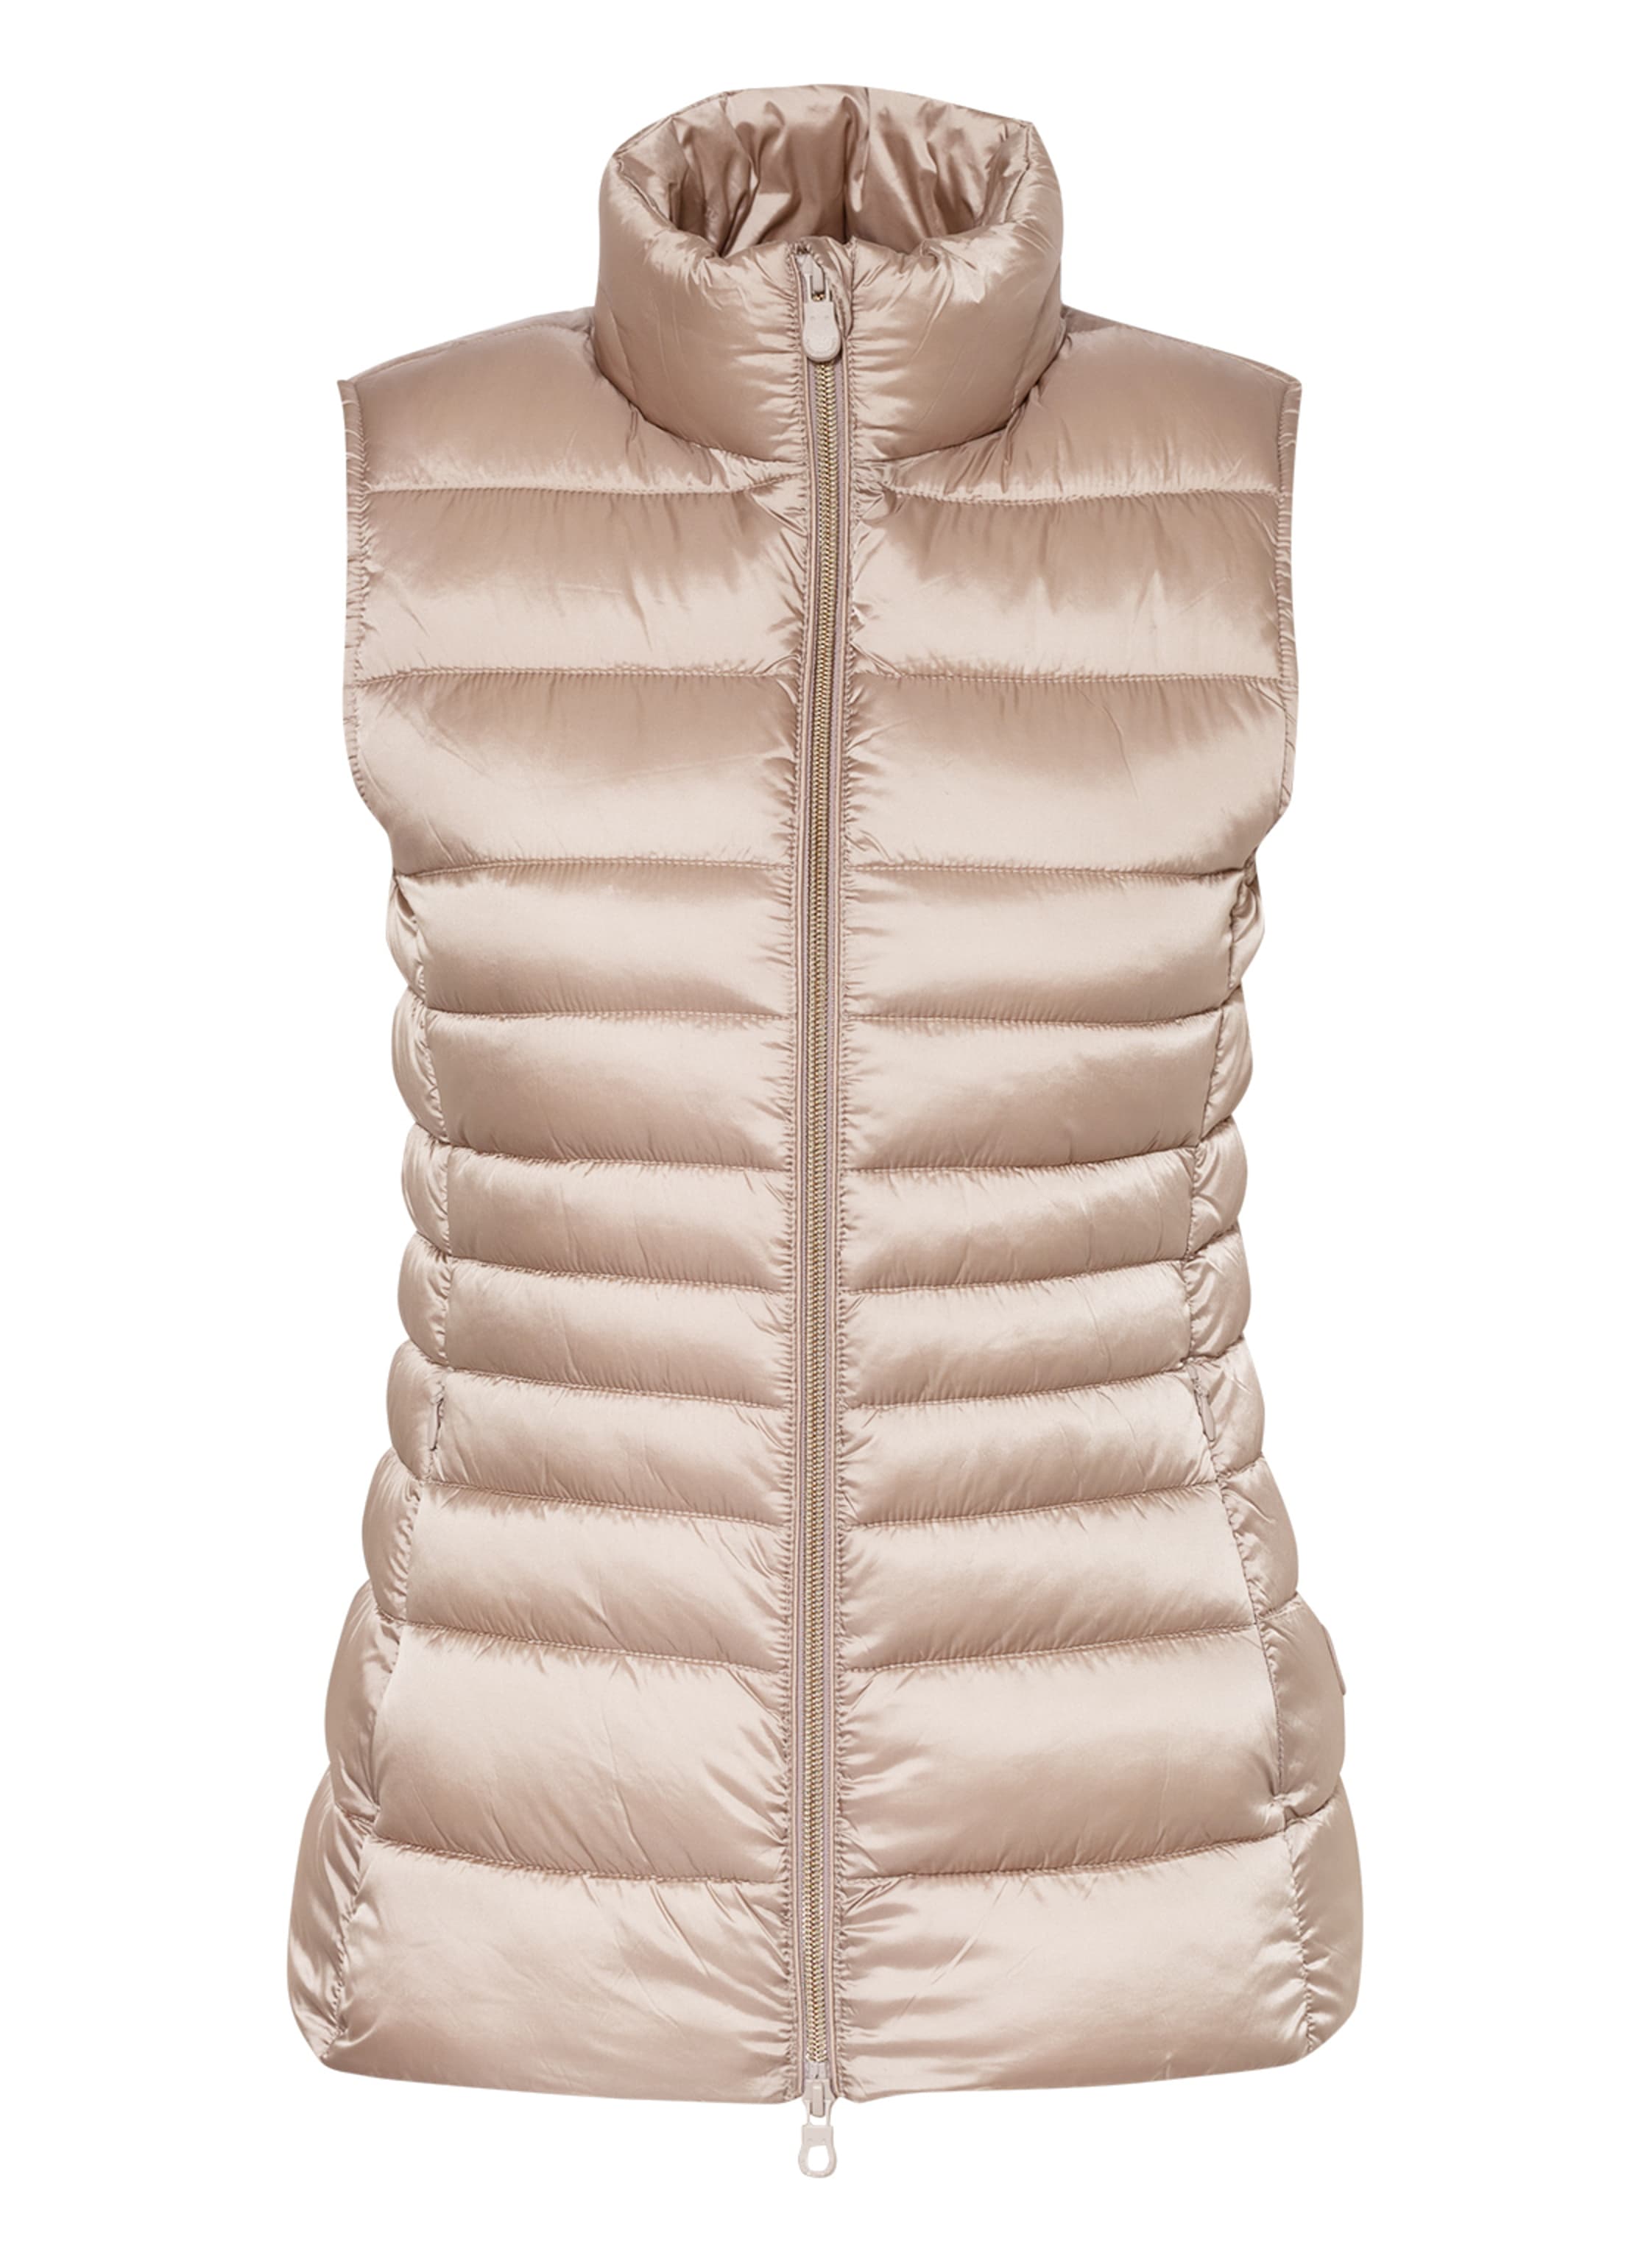 SAVE THE DUCK Quilted vest IRIS LYNN in taupe | Steppwesten